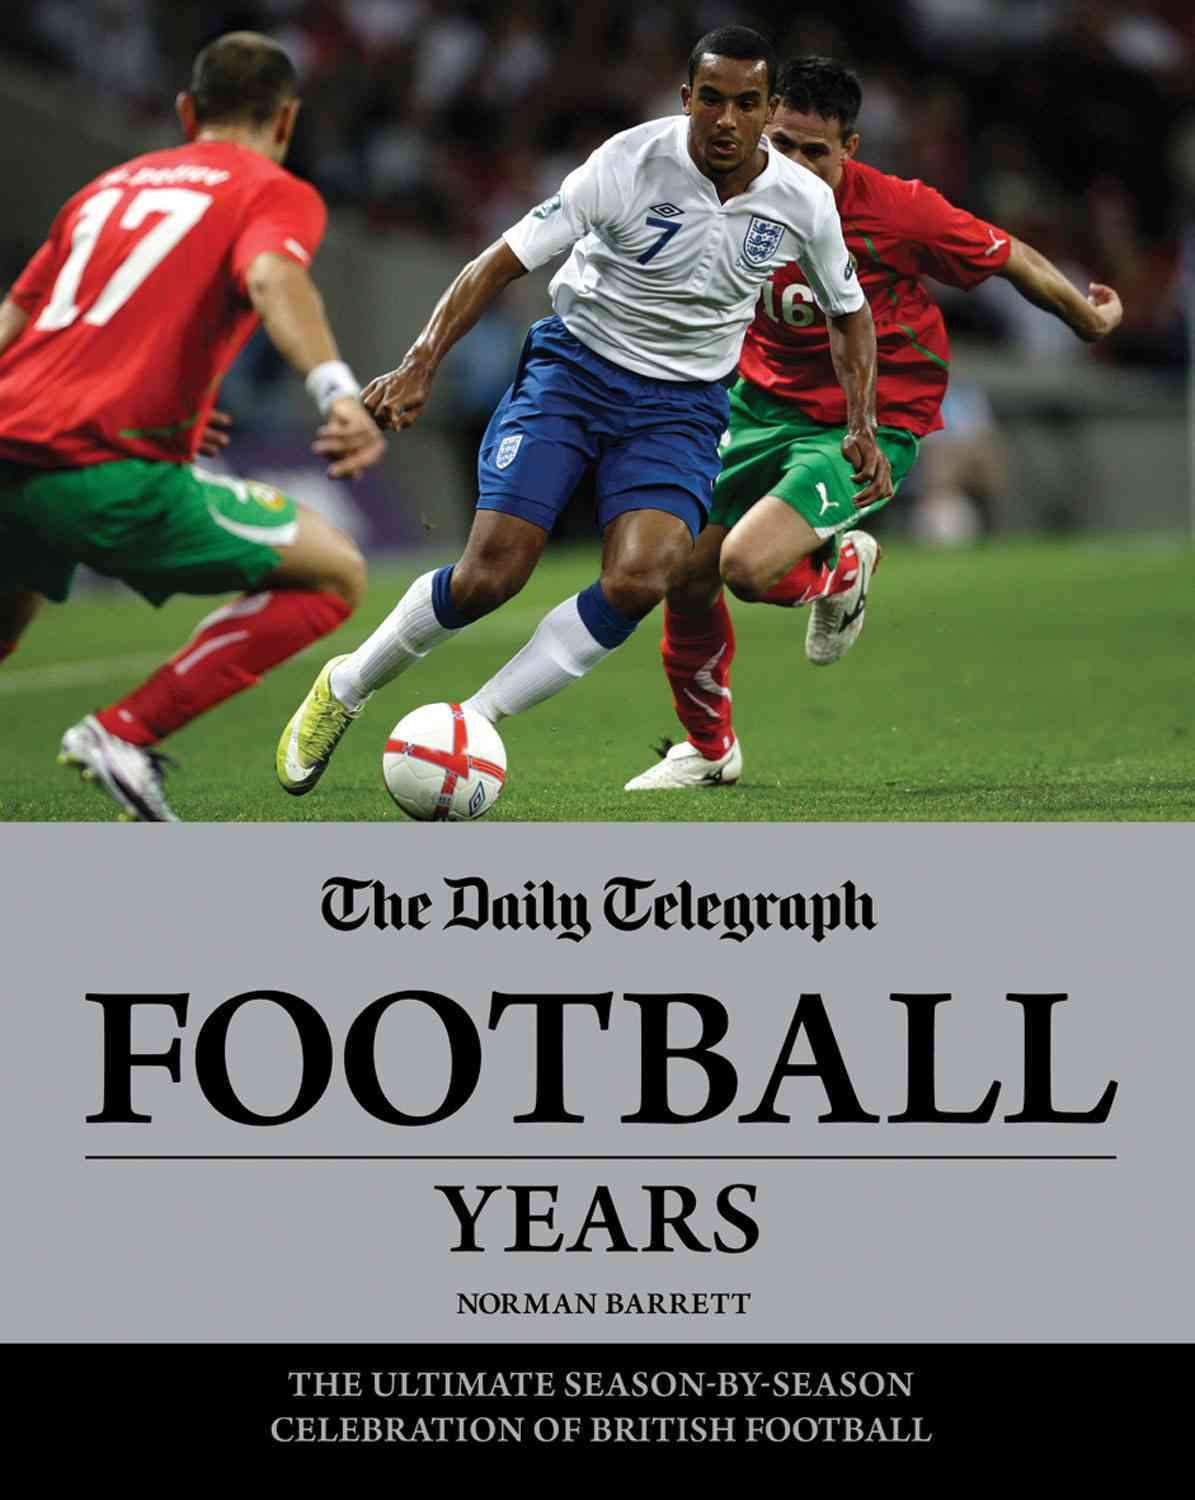 The Daily Telegraph Football Years